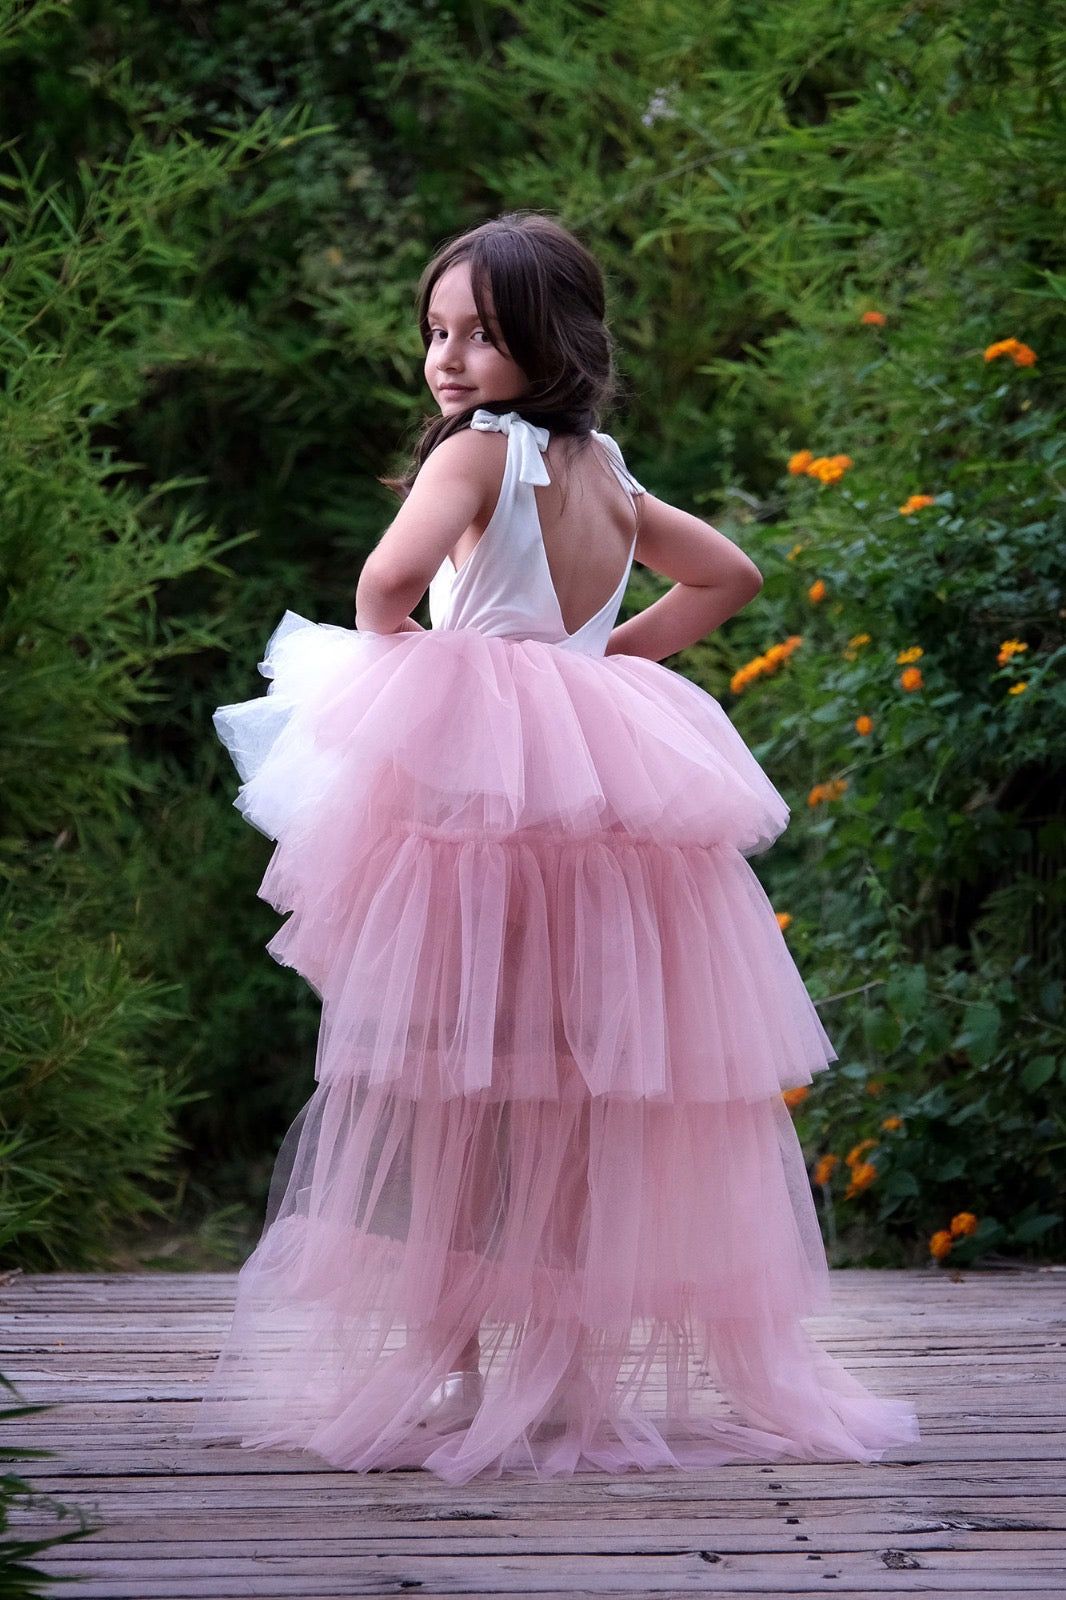 a little girl in a pink dress standing on a wooden walkway